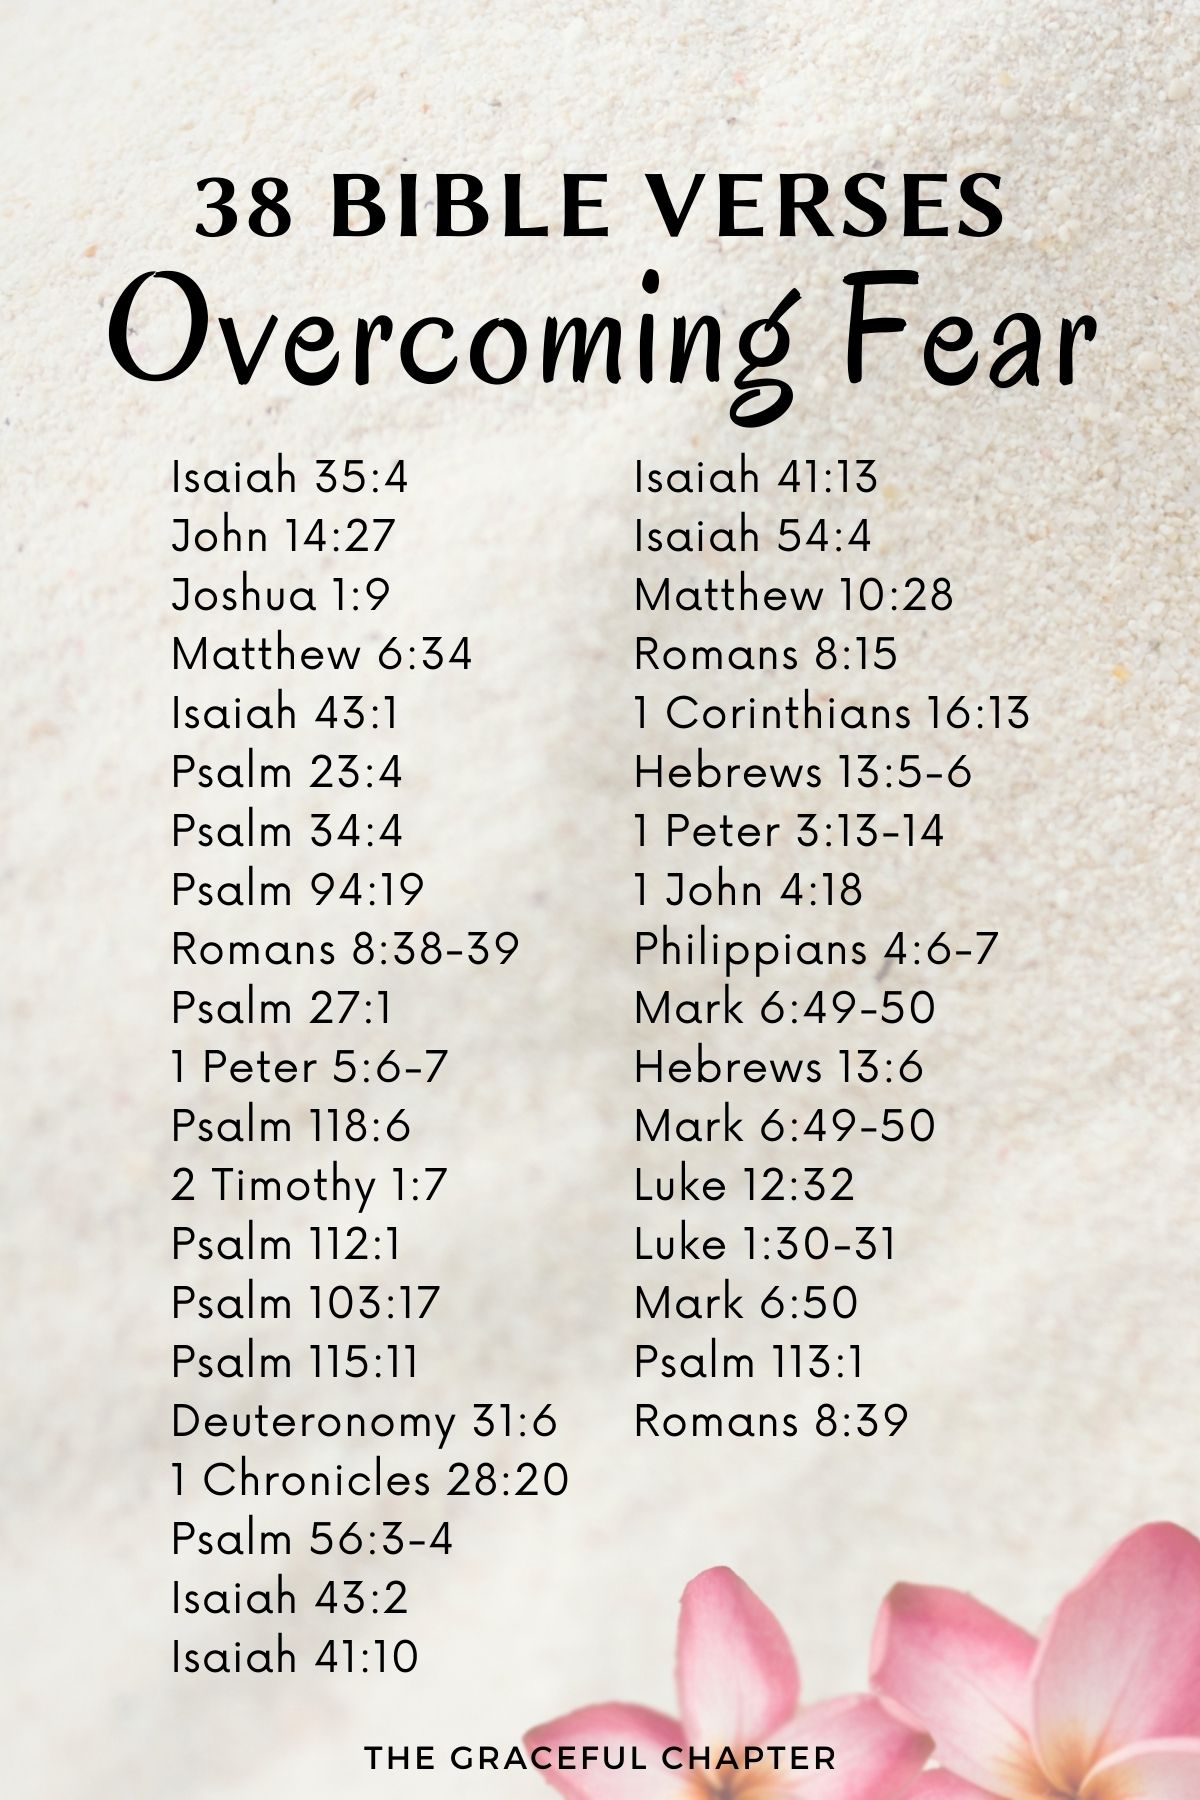 38 bible verses for overcoming fear